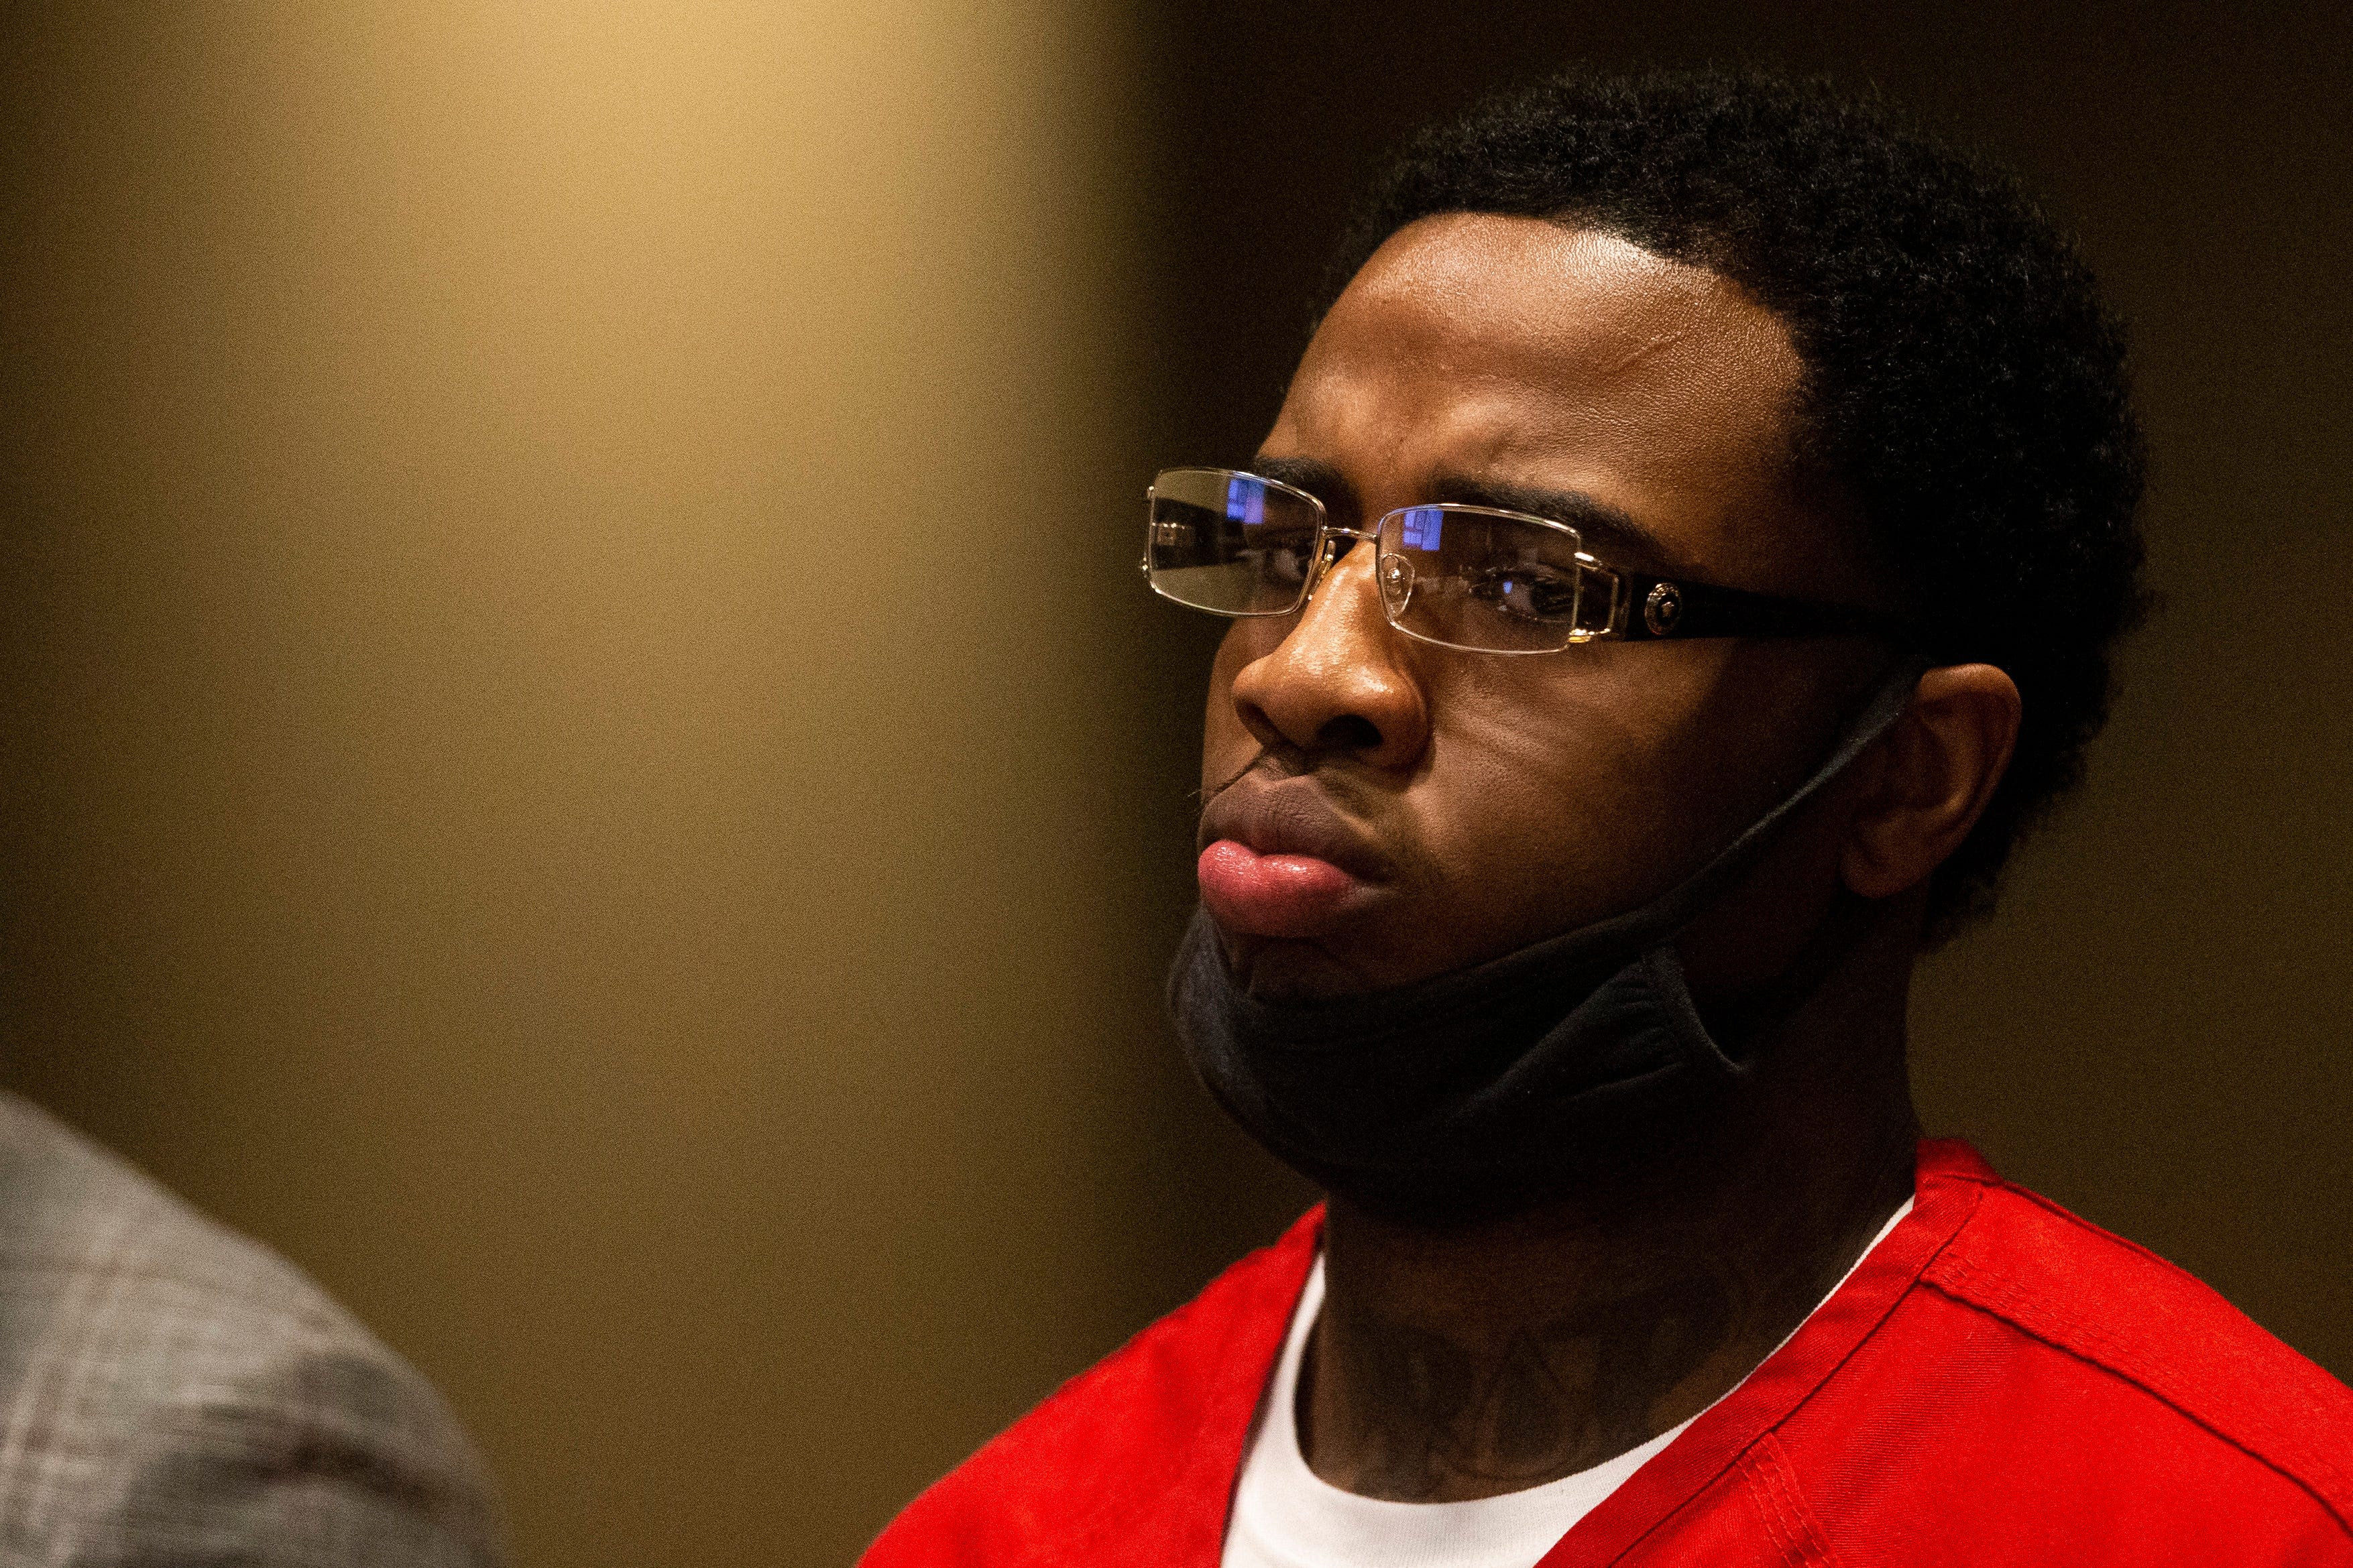 Trial has been set for the Young Dolph murder case — again. Here's where it stands